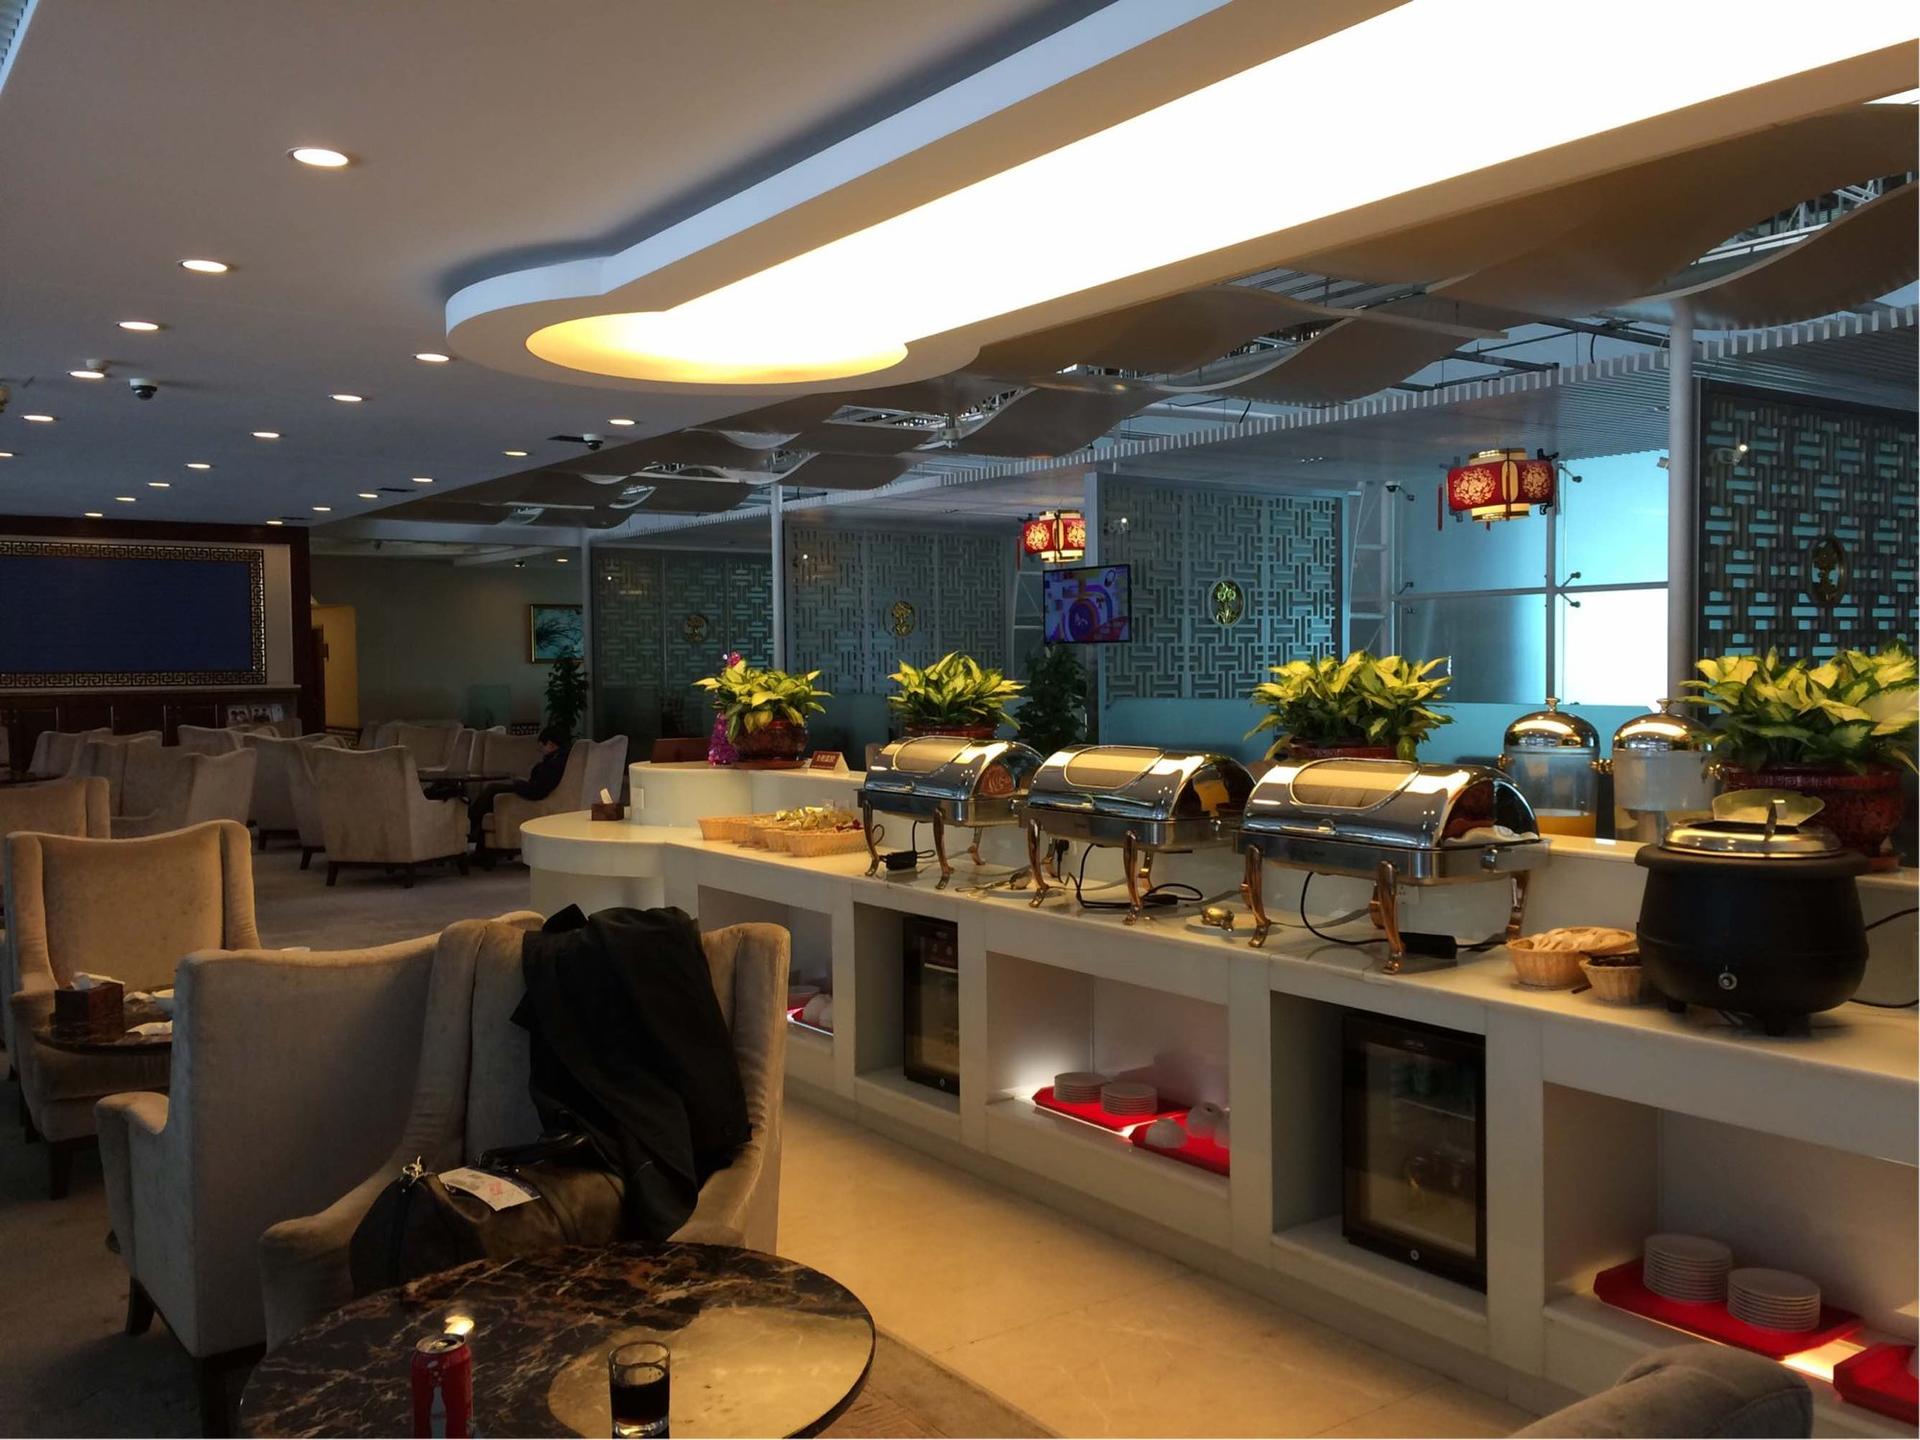 Dalian Airport First Class Lounge image 5 of 5